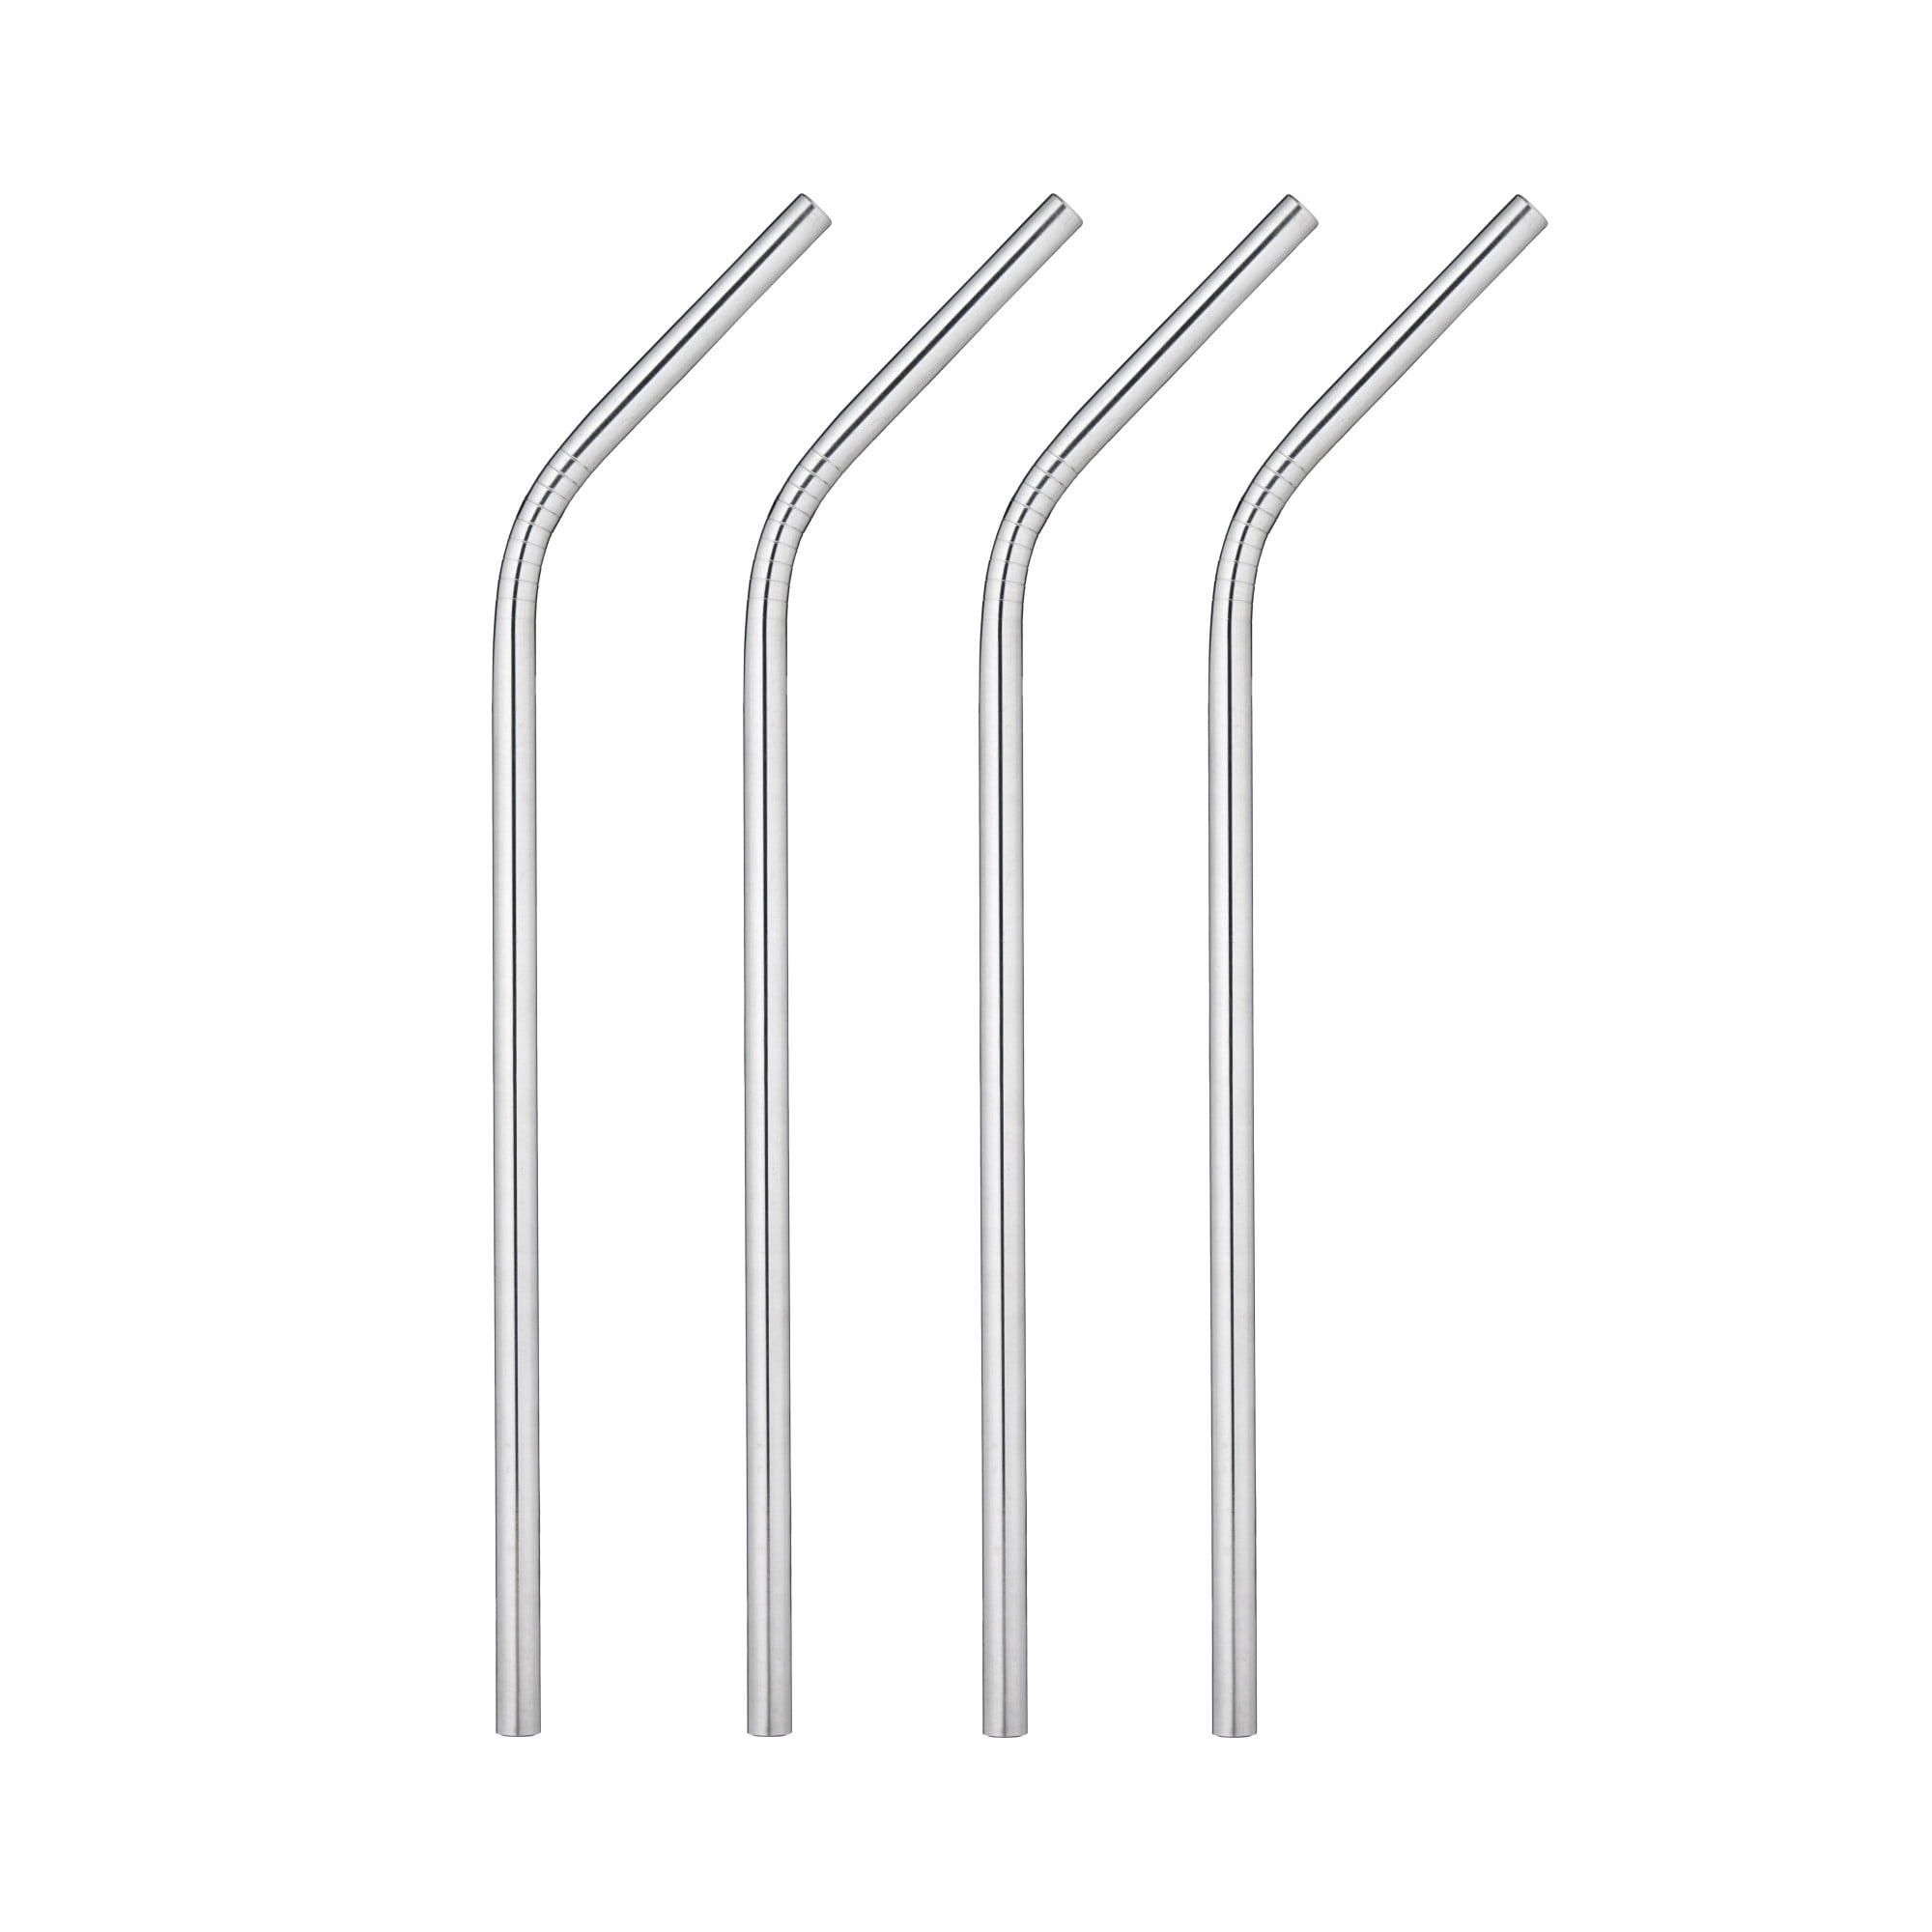 Kichwit Extra Long Stainless Steel Straws Set of 8, Reusable Wide Straws  for Smoothies, 10.5 Inches Long, 5/16 Wide, Metal Drinking Straws, 2